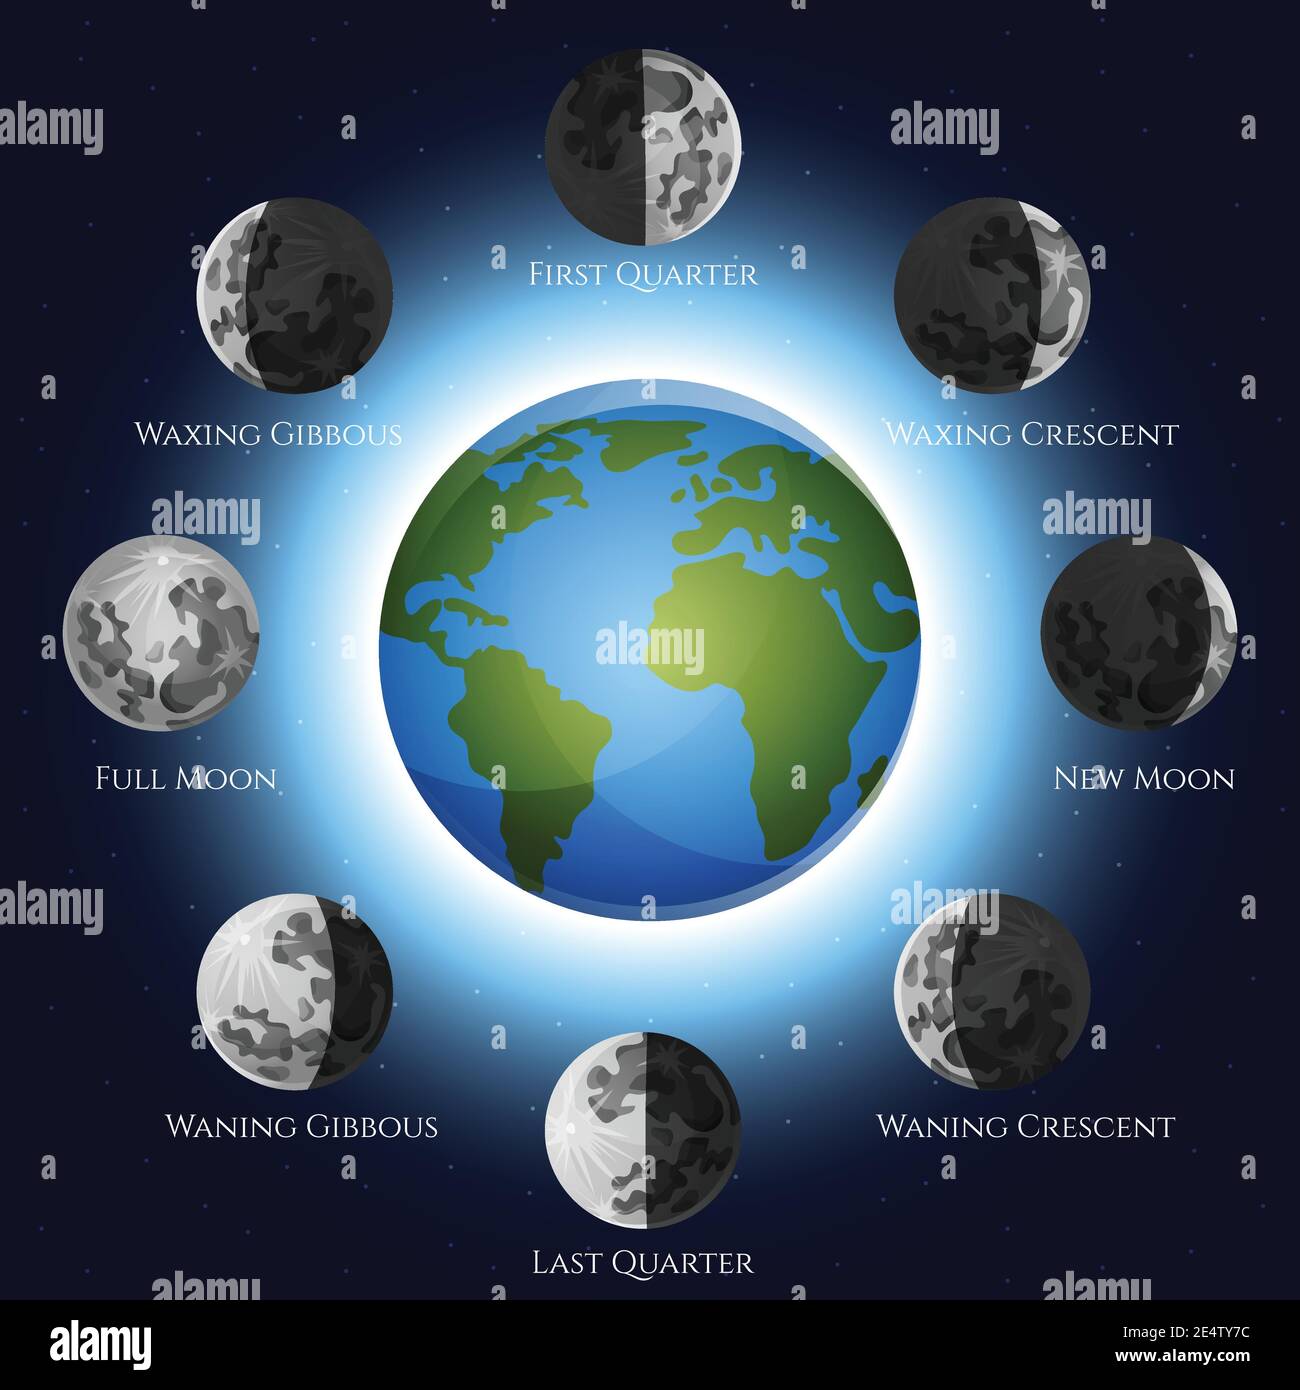 Moon phases lunar cycle shadow and earth globe vector illustration